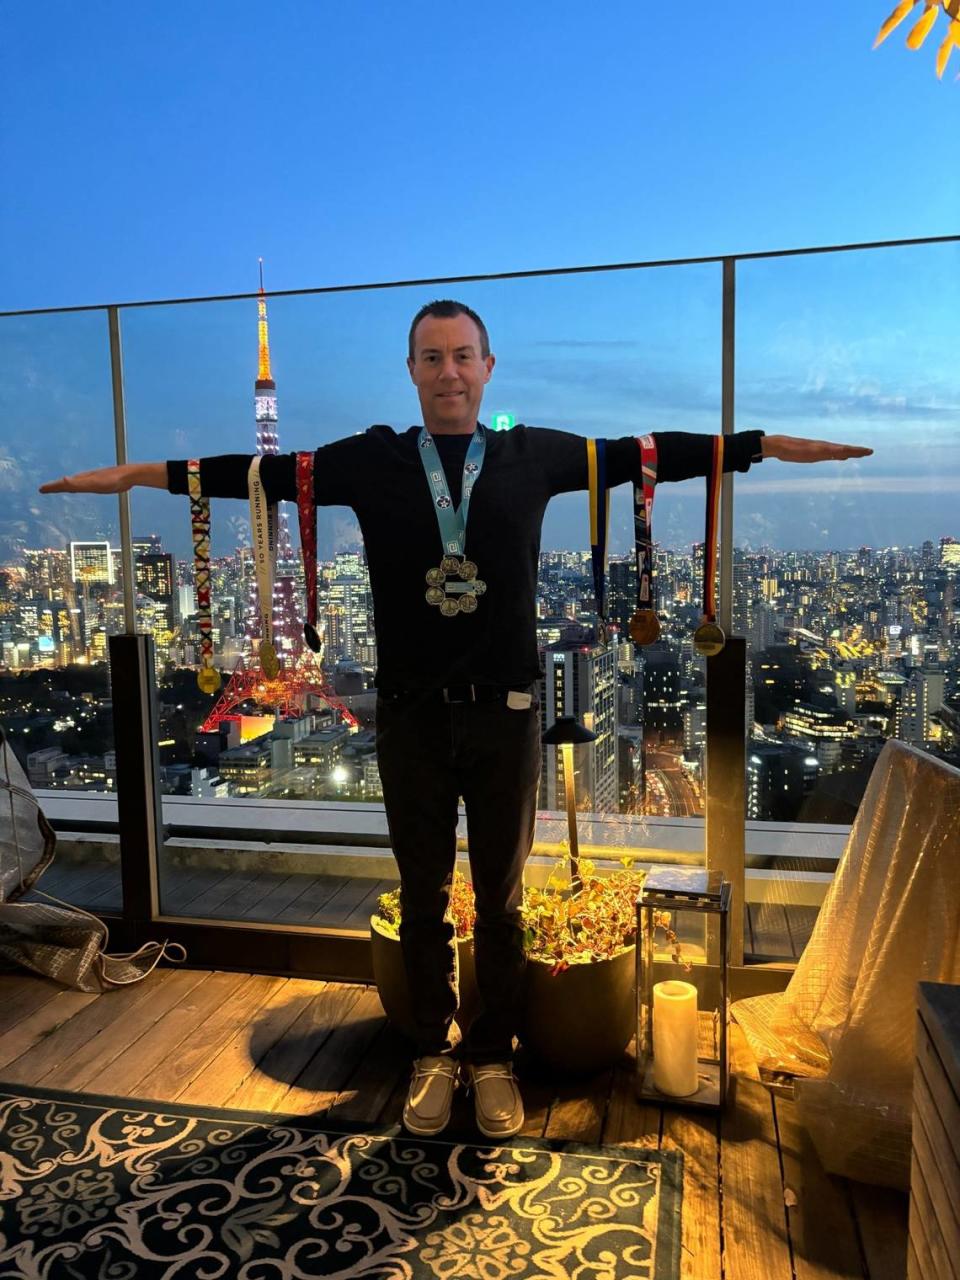 A survivor of the 1988 Carrollton bus crash, Mercer County Schools superintendent Jason Booher has completed all six of the world’s major marathons in Berlin, Boston, Chicago, London, New York and Tokyo while running to to raise awareness about the consequences of drunk driving. Photo provided